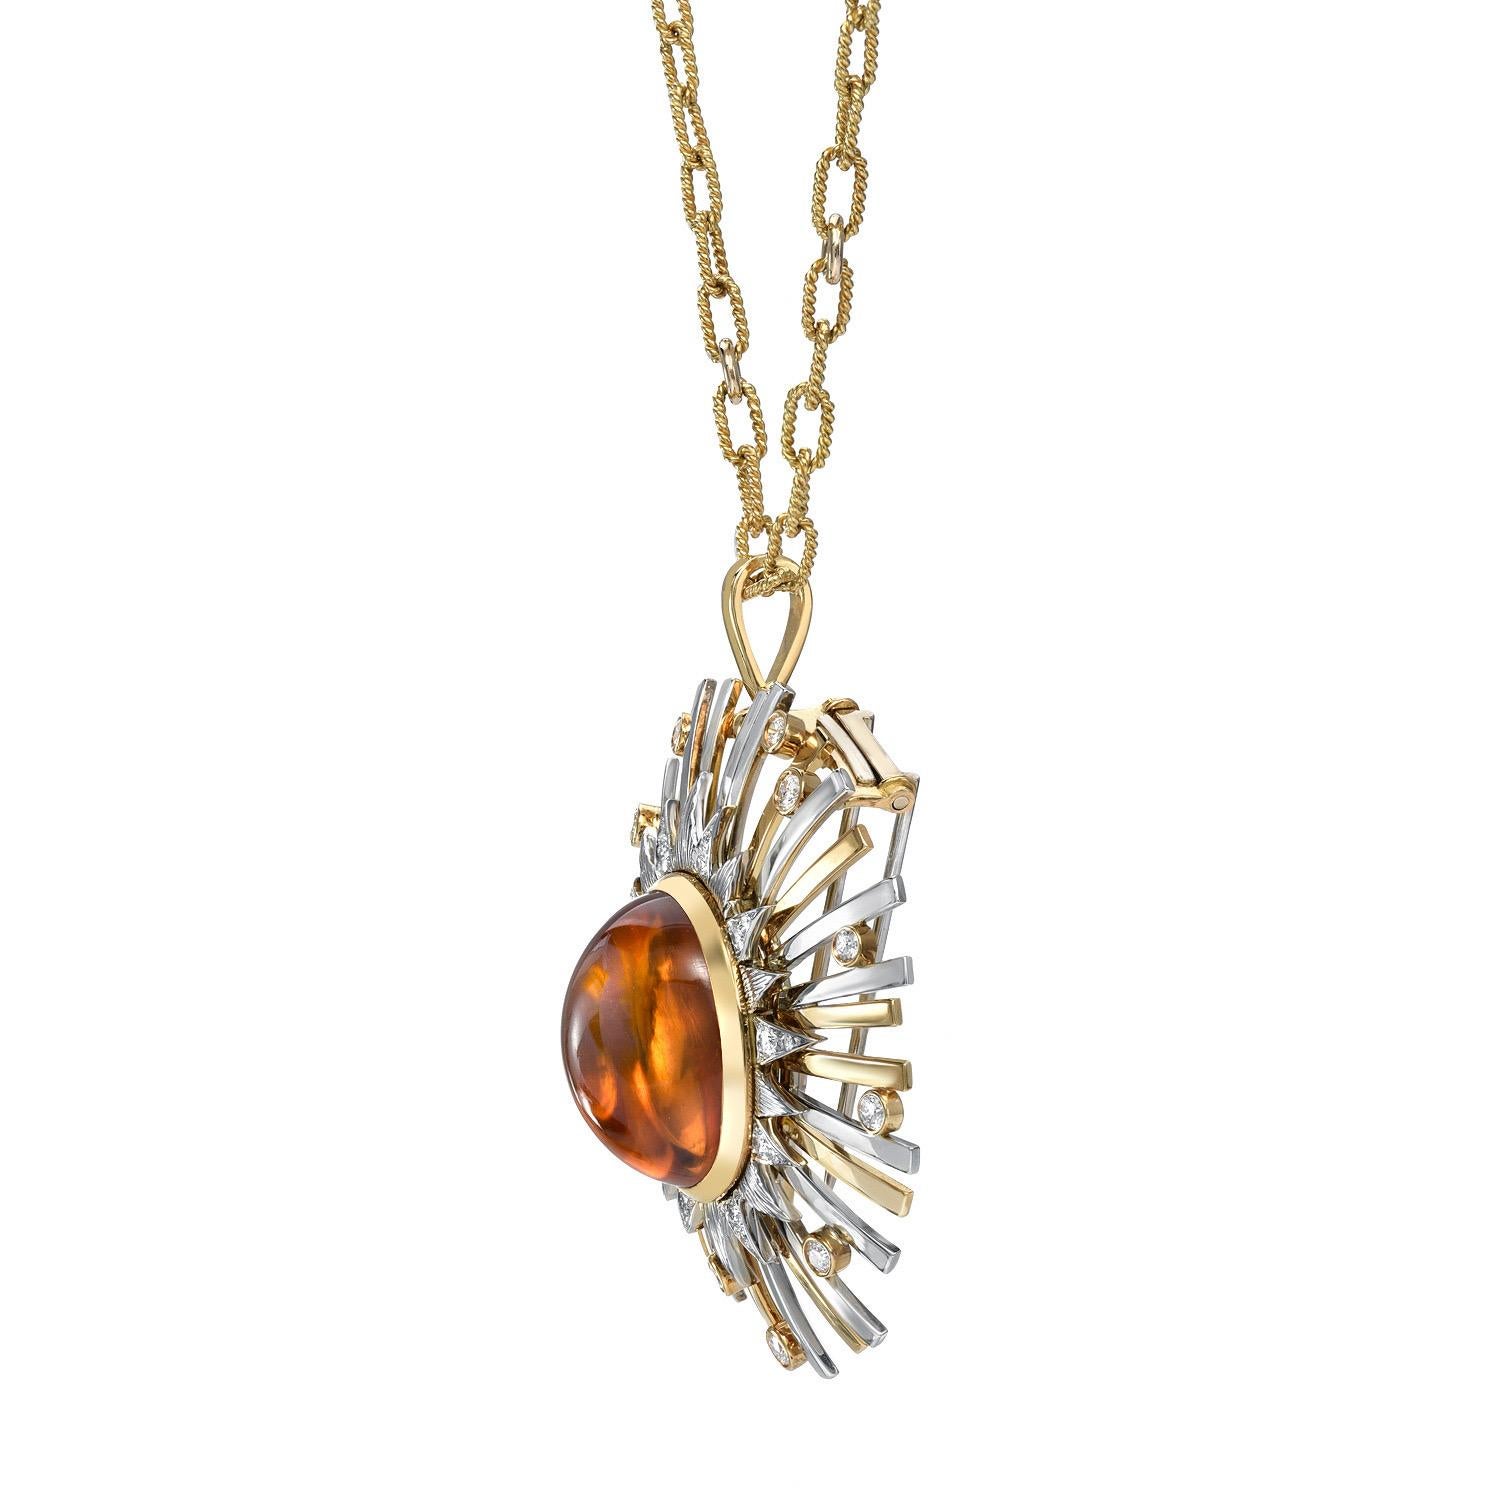 Exceptional 24.14 carat Madeira Citrine Cabochon, set in a state of the art, convertible pendant necklace and brooch, adorned by a total of 0.86 carats of diamonds.
Crafted by extremely skilled hands in 18K yellow and white gold.
Total length and